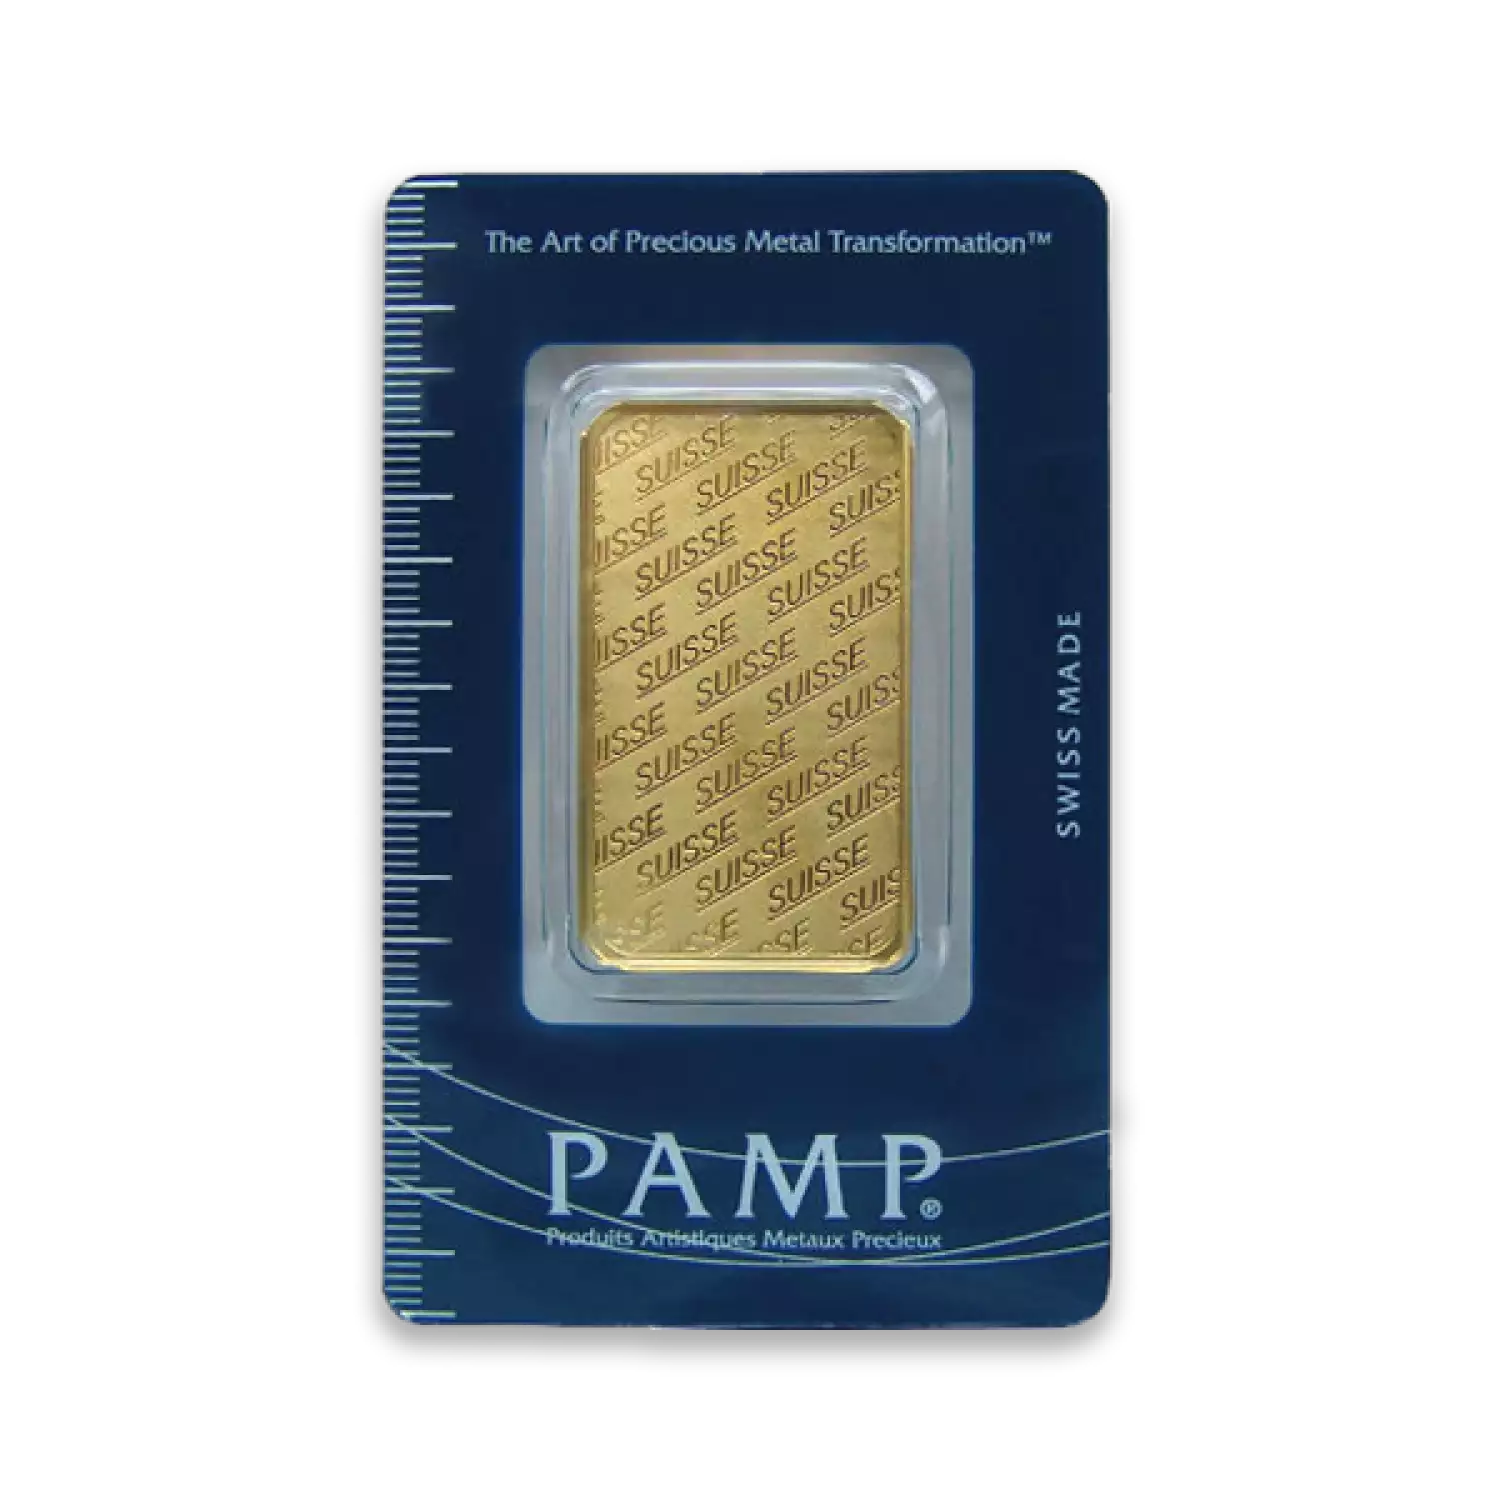 1oz PAMP Gold Bar - Suisse Repeater